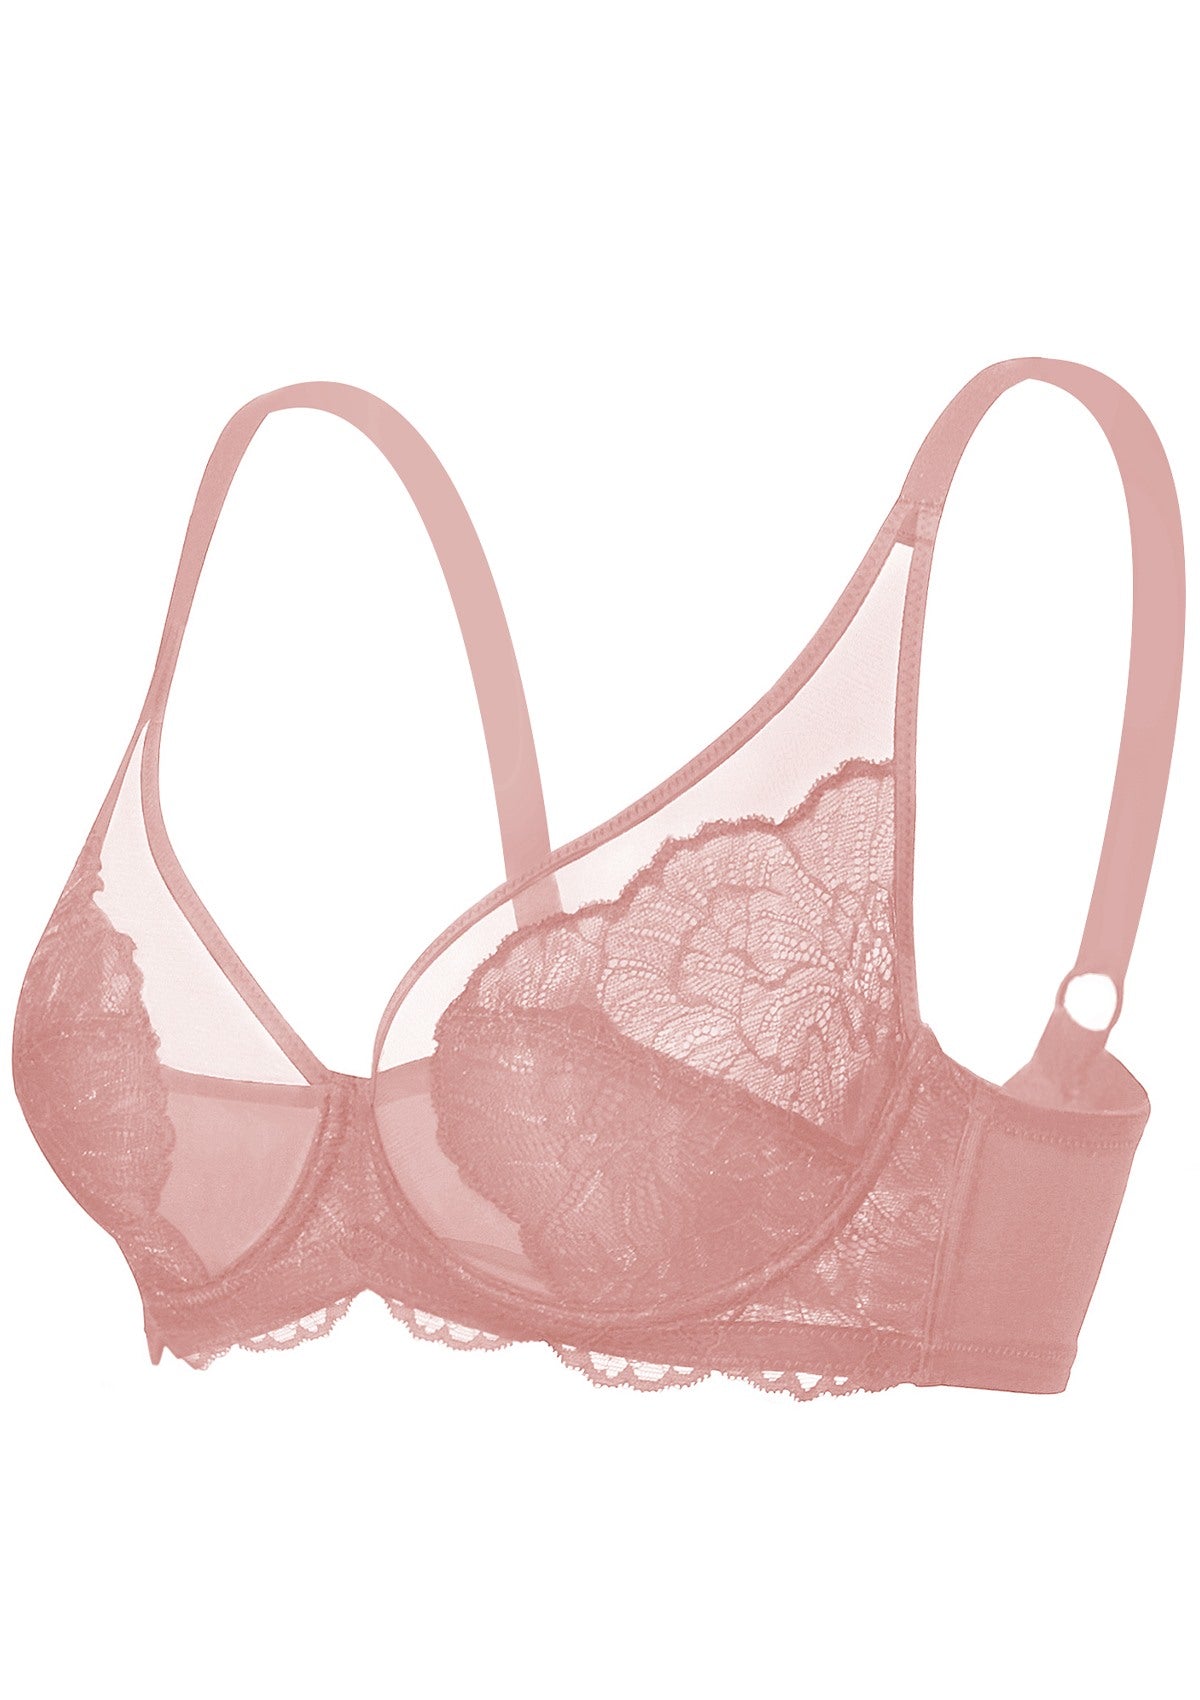 HSIA Blossom Unlined Lace Underwire Bra - Raspberry / 44 / D